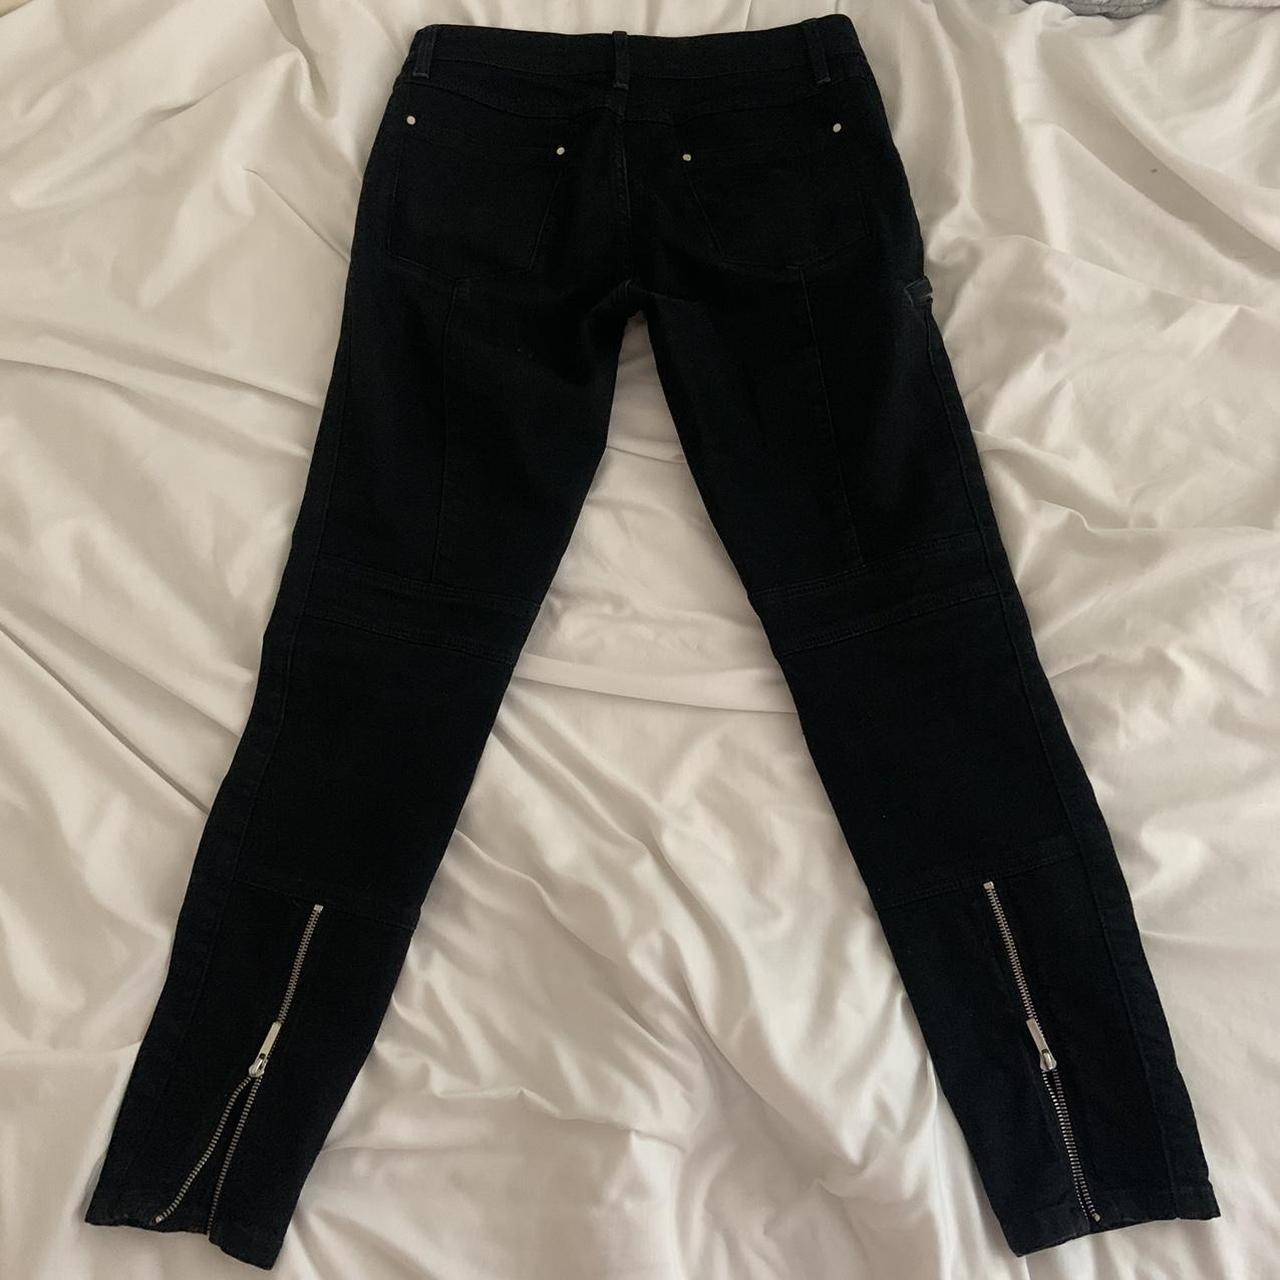 Product Image 2 - low rise black skinny jeans